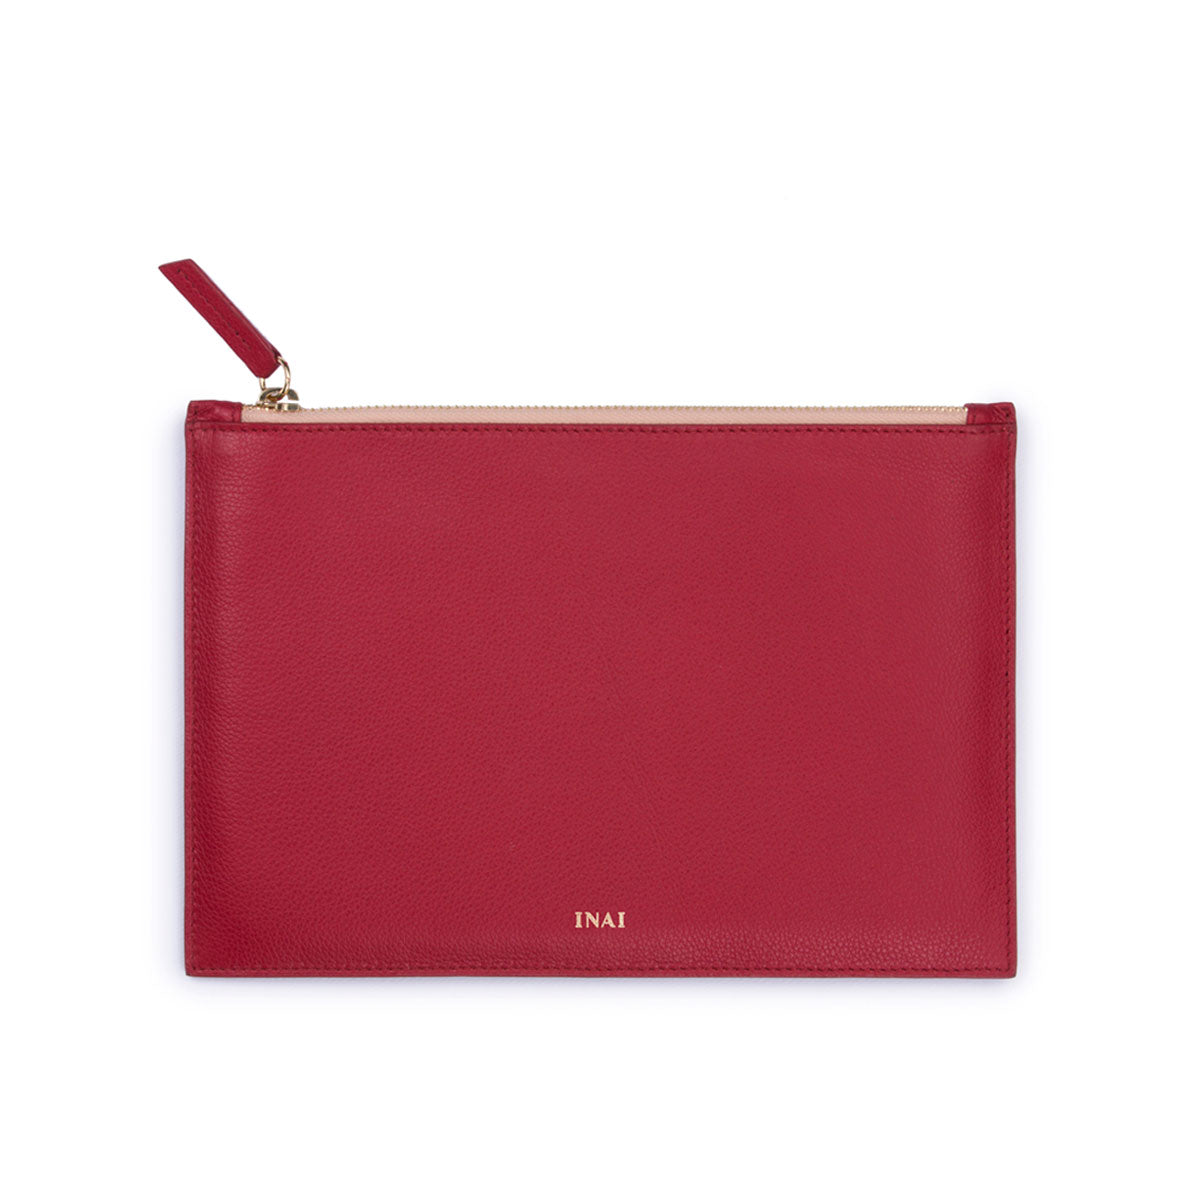 rectangular clutch with zip and a slim slip case